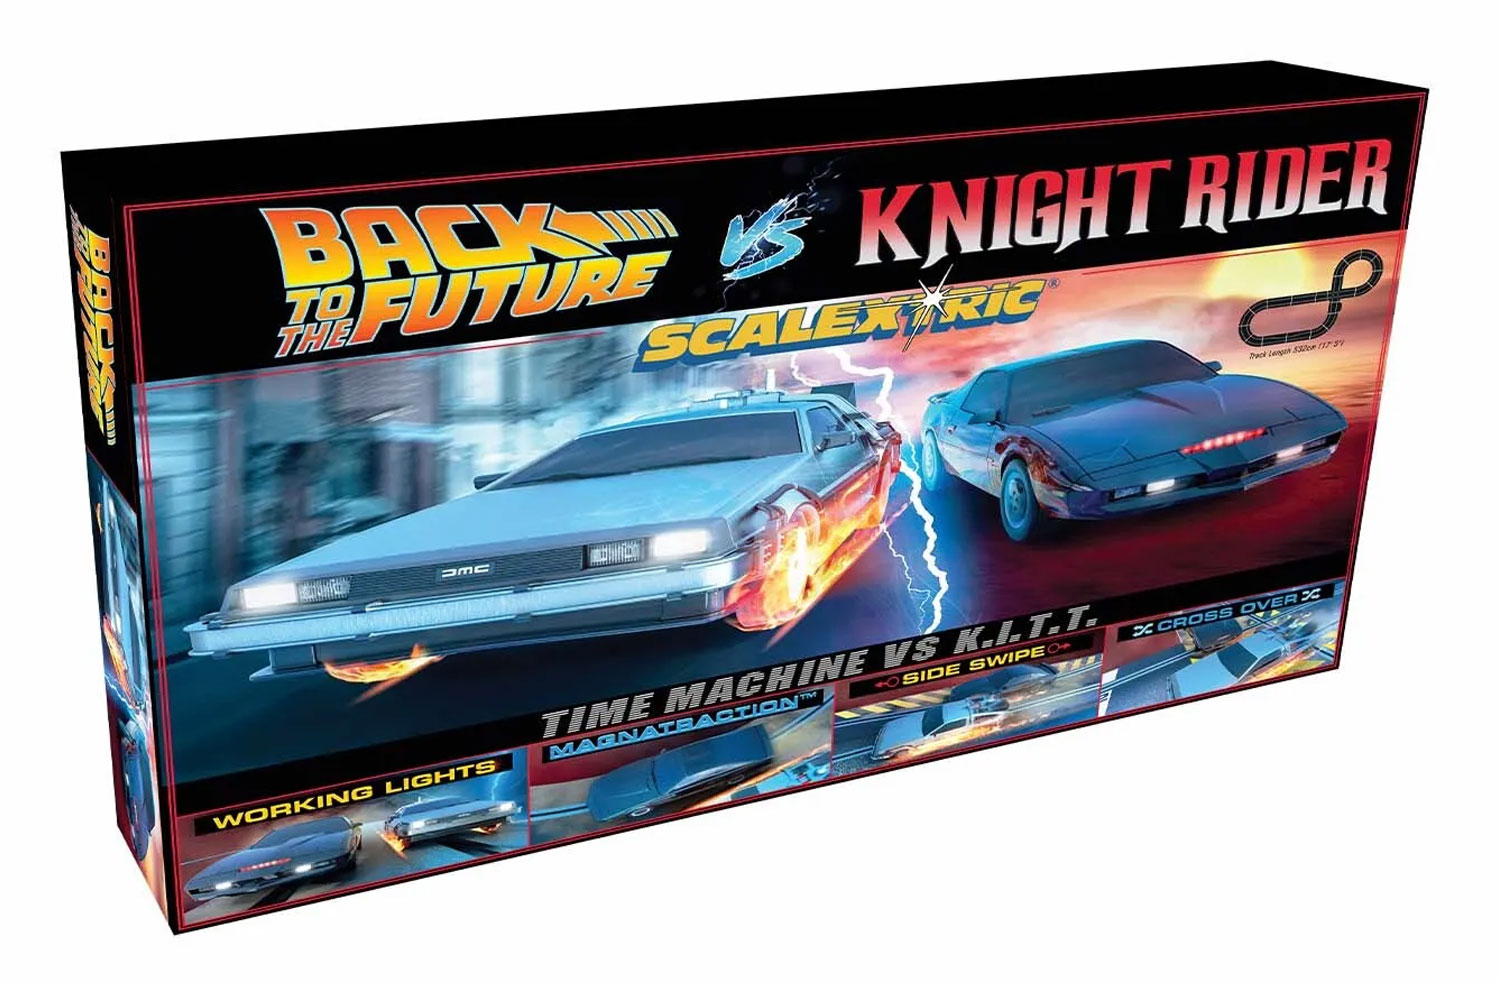 Scalextric 1980s TV  - Back to the Future vs Knight Rider 1/32 Slot Car Track Set